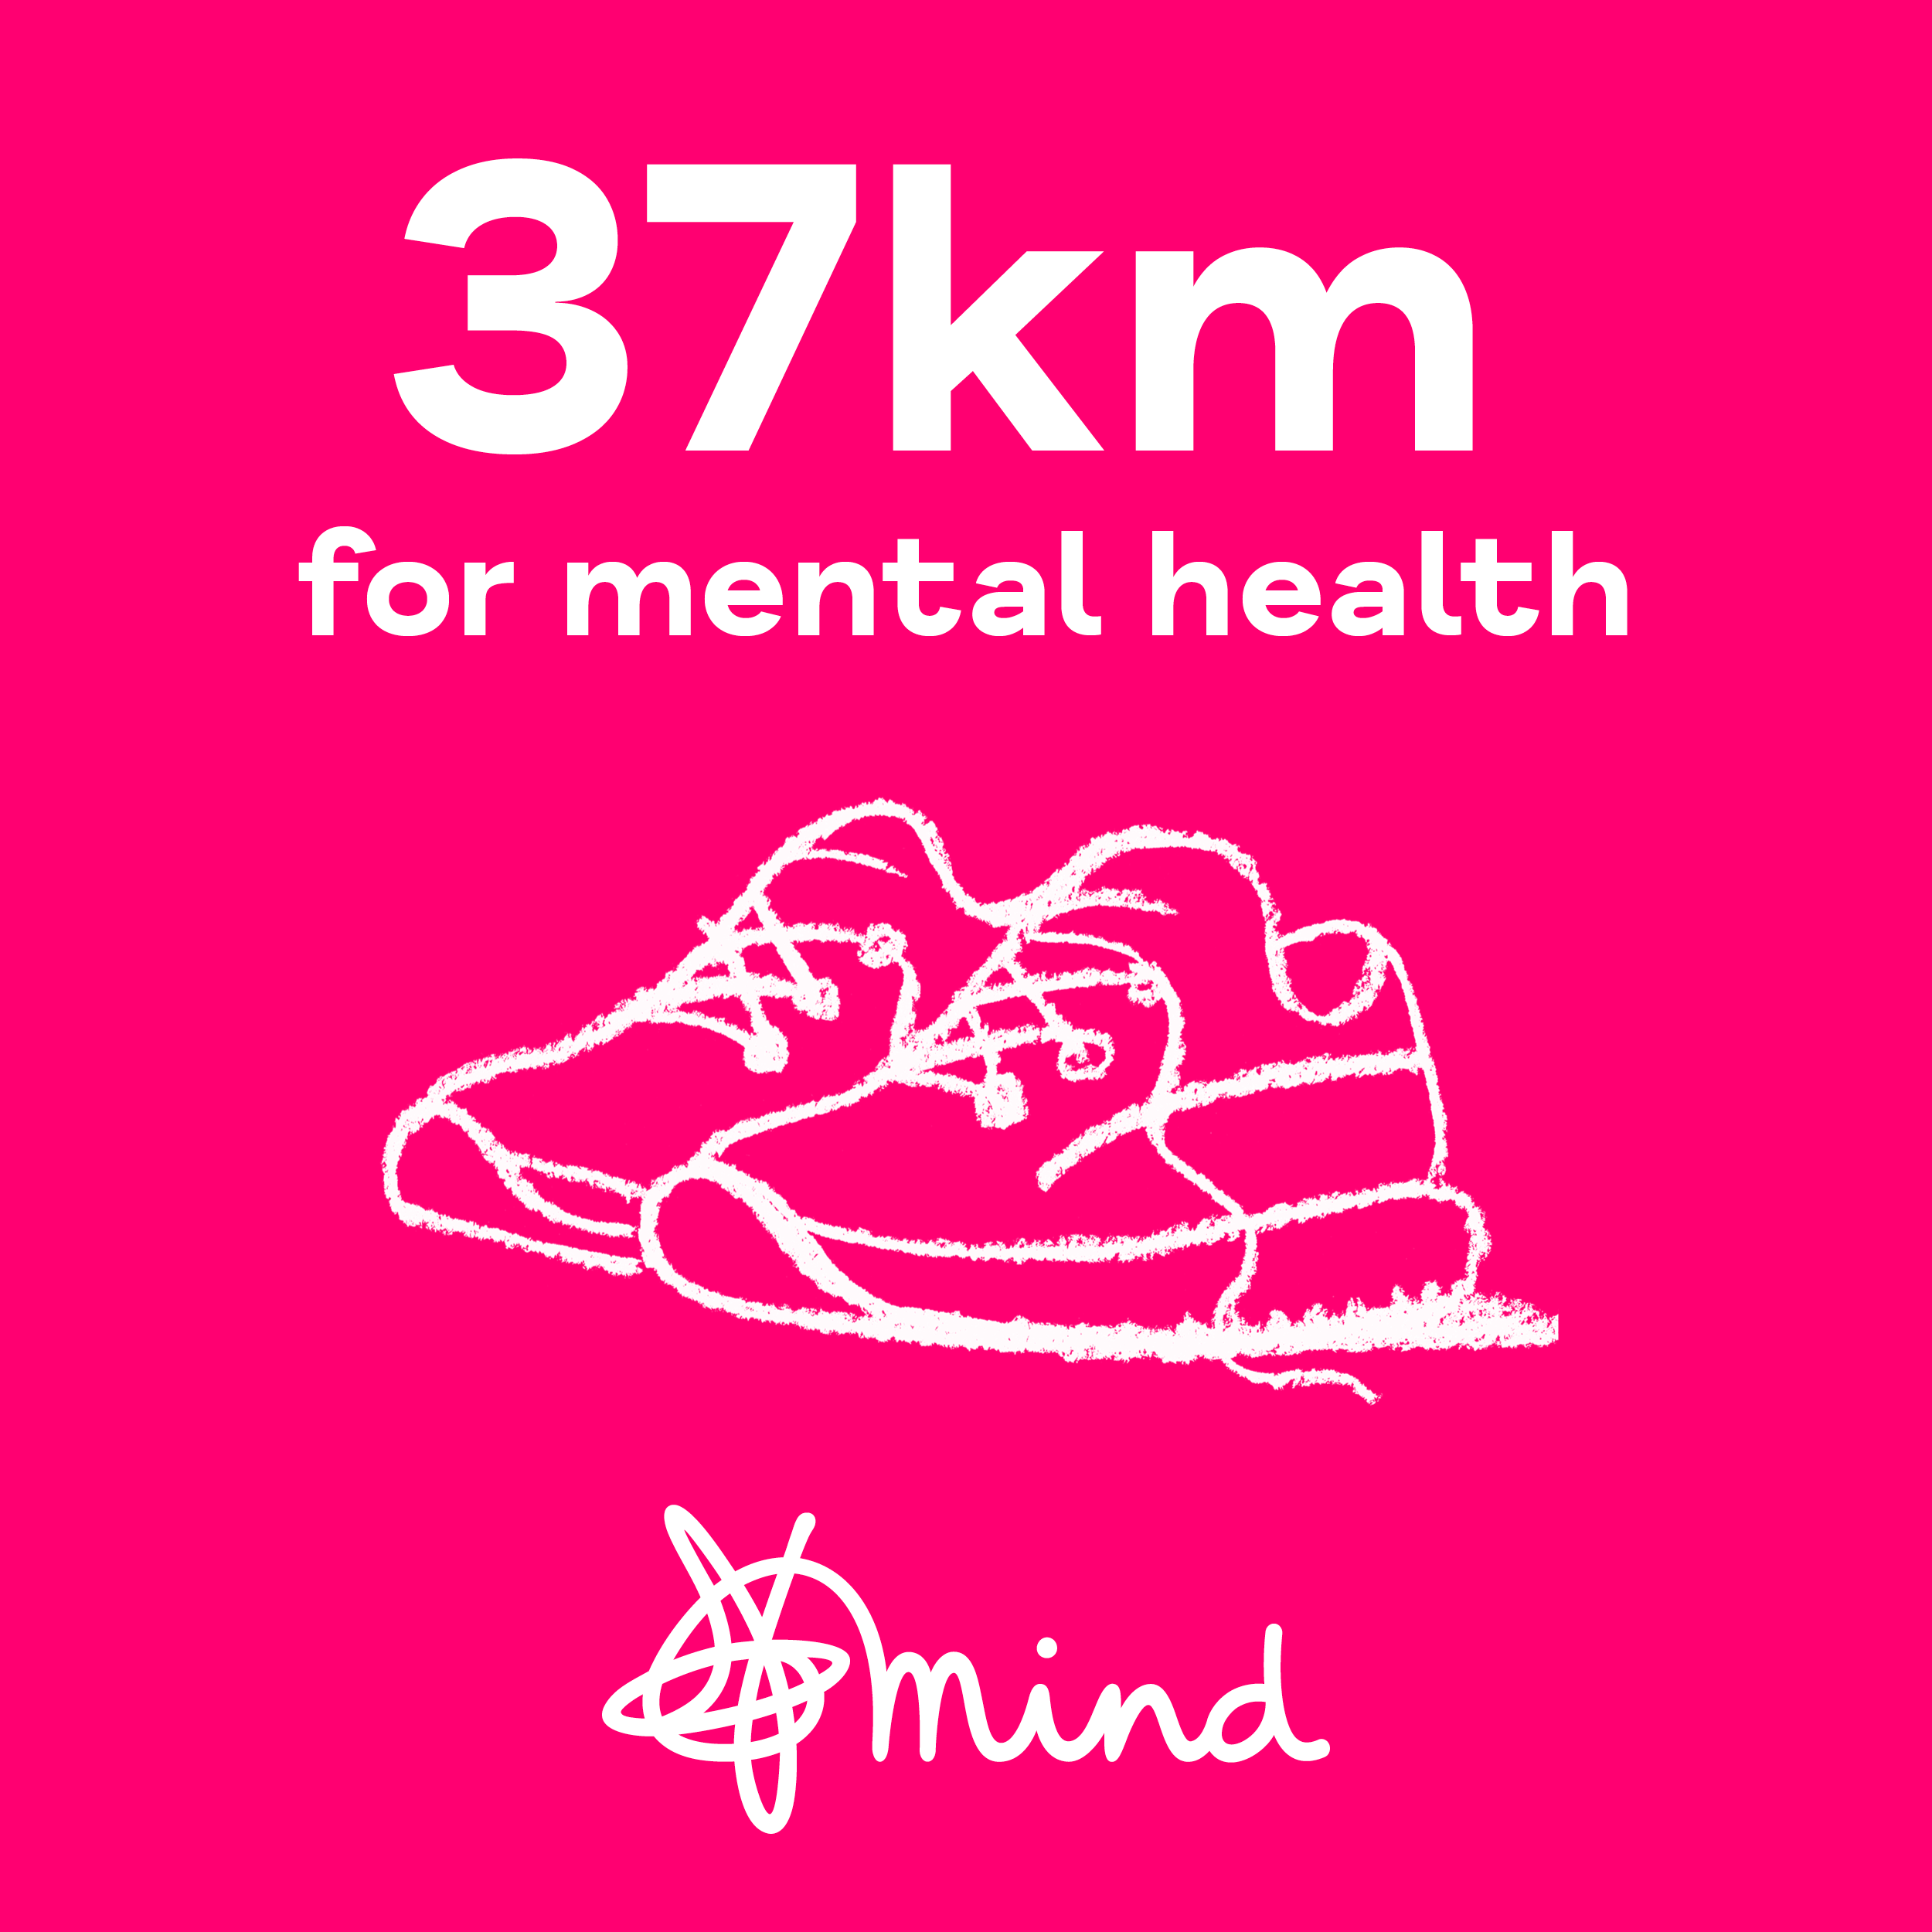 The words '37km for mental health' with an illustration of a pair of trainers and the Mind logo